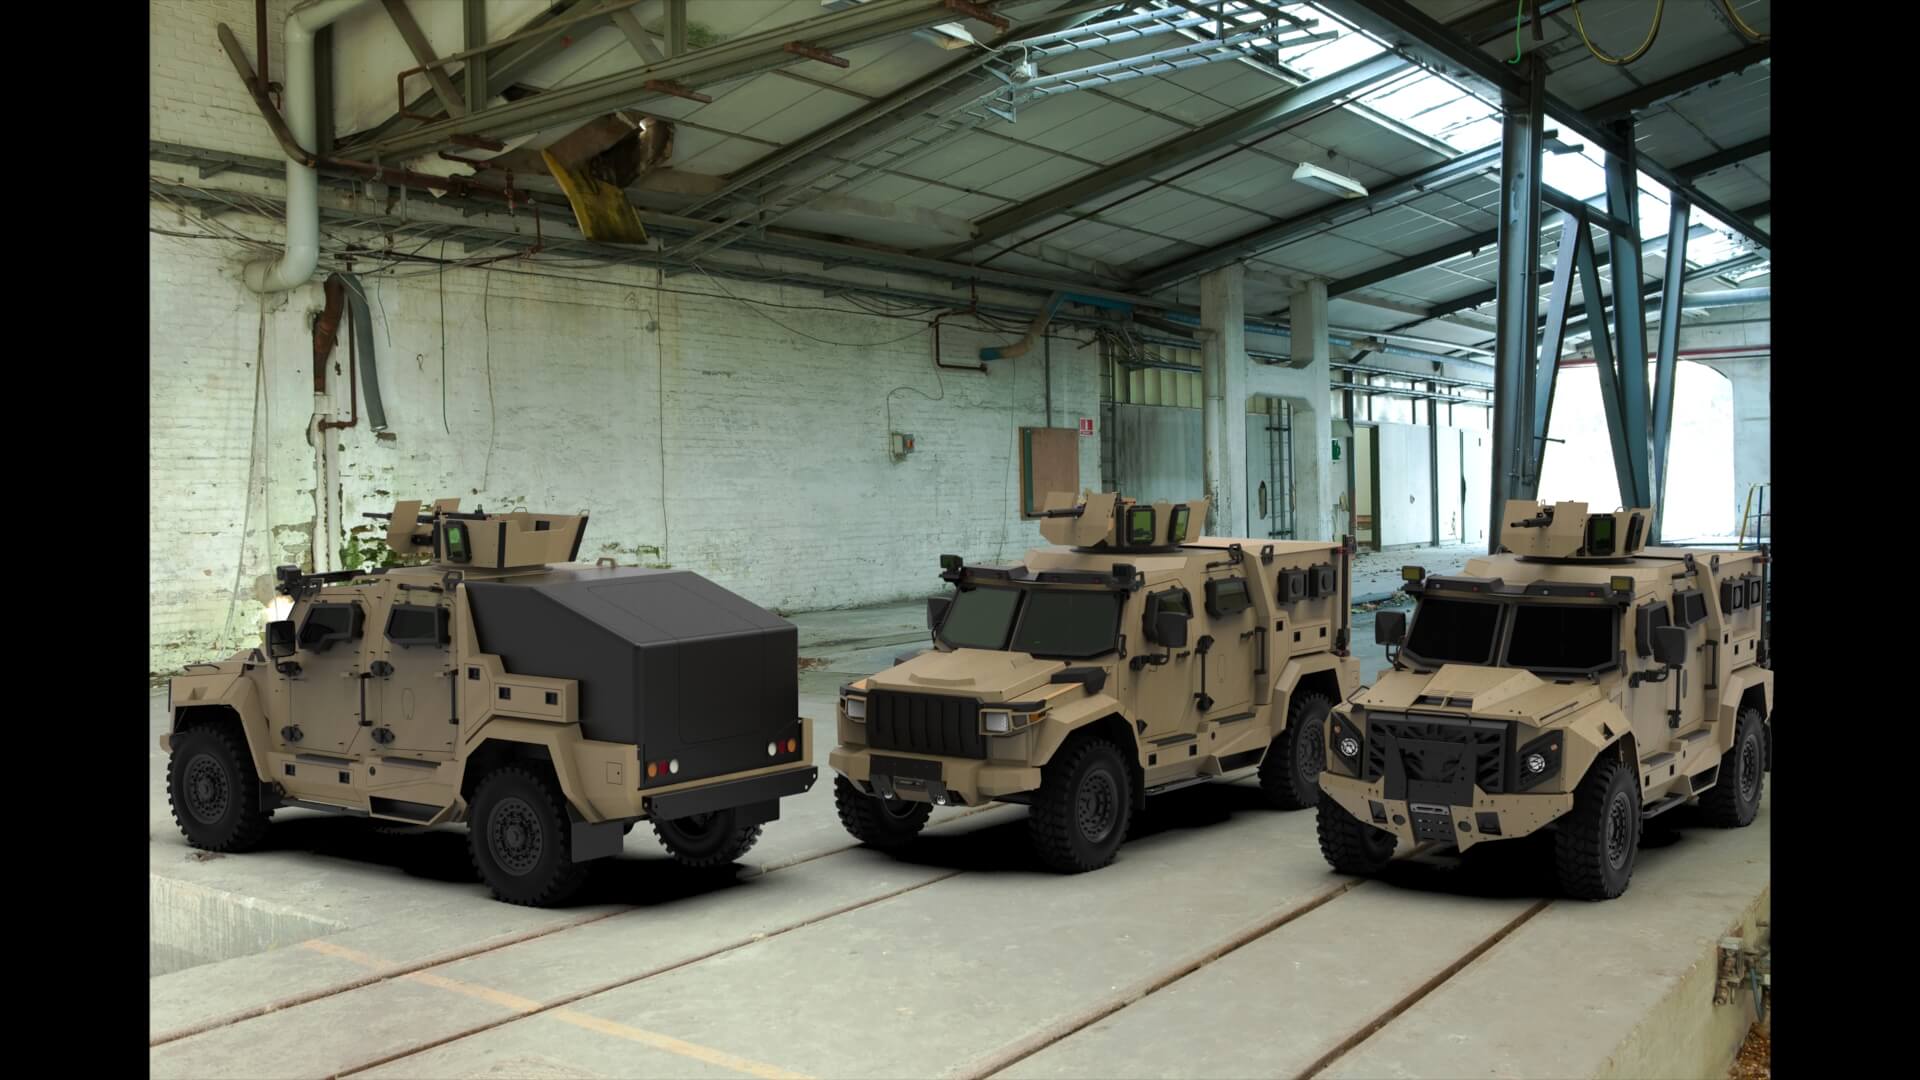 BATT military vehicles manufactured by the armored group